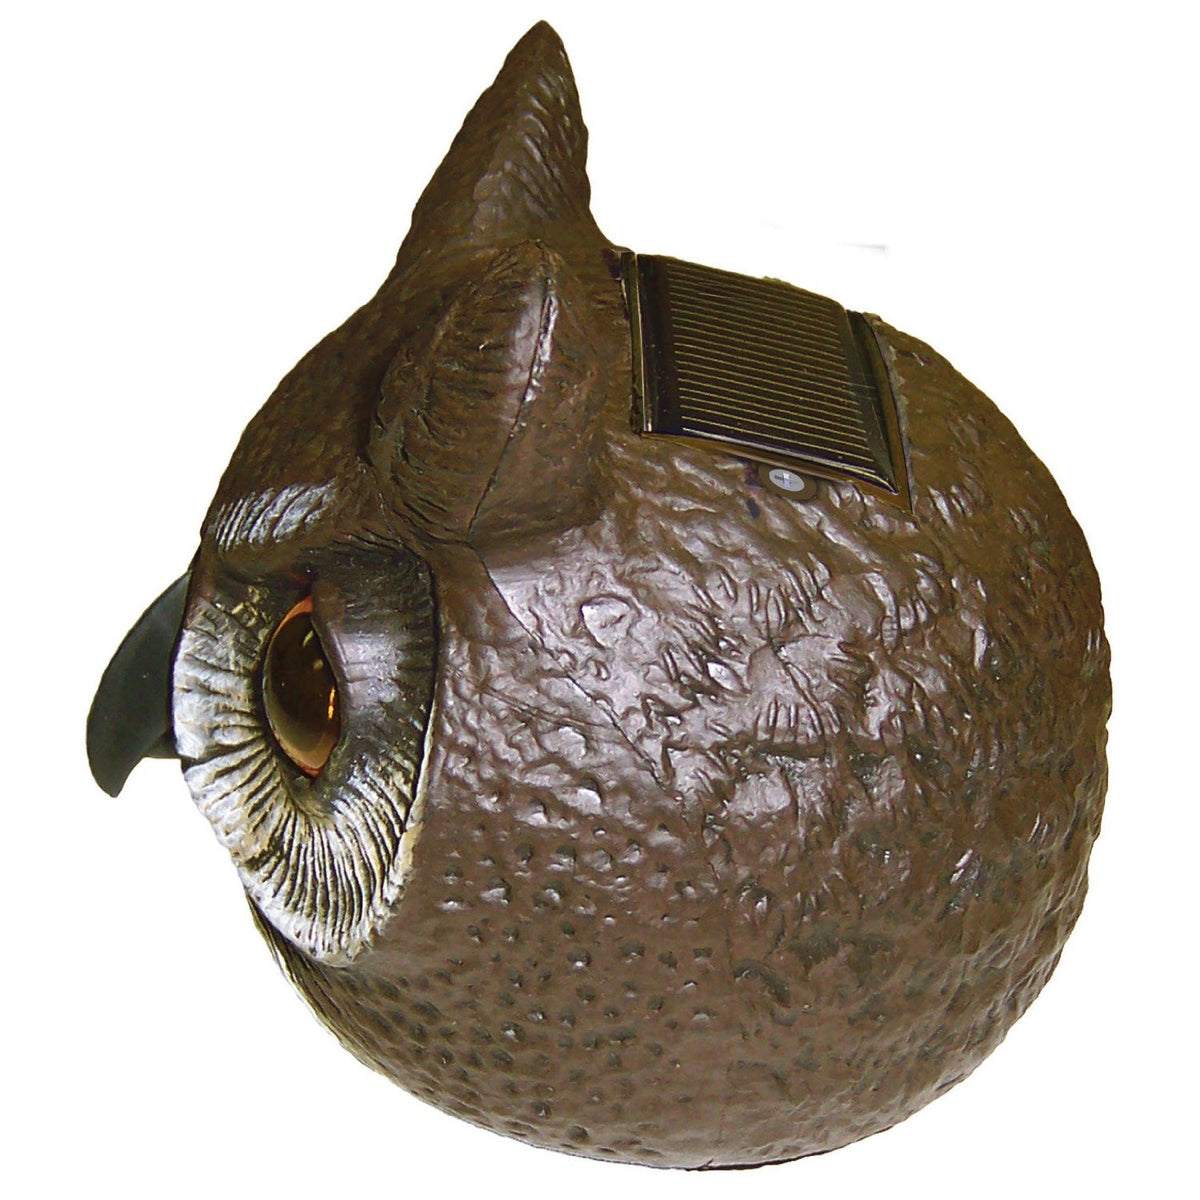 Buy solar action owl - Online store for outdoor & lawn decor, decorative stones & statues in USA, on sale, low price, discount deals, coupon code